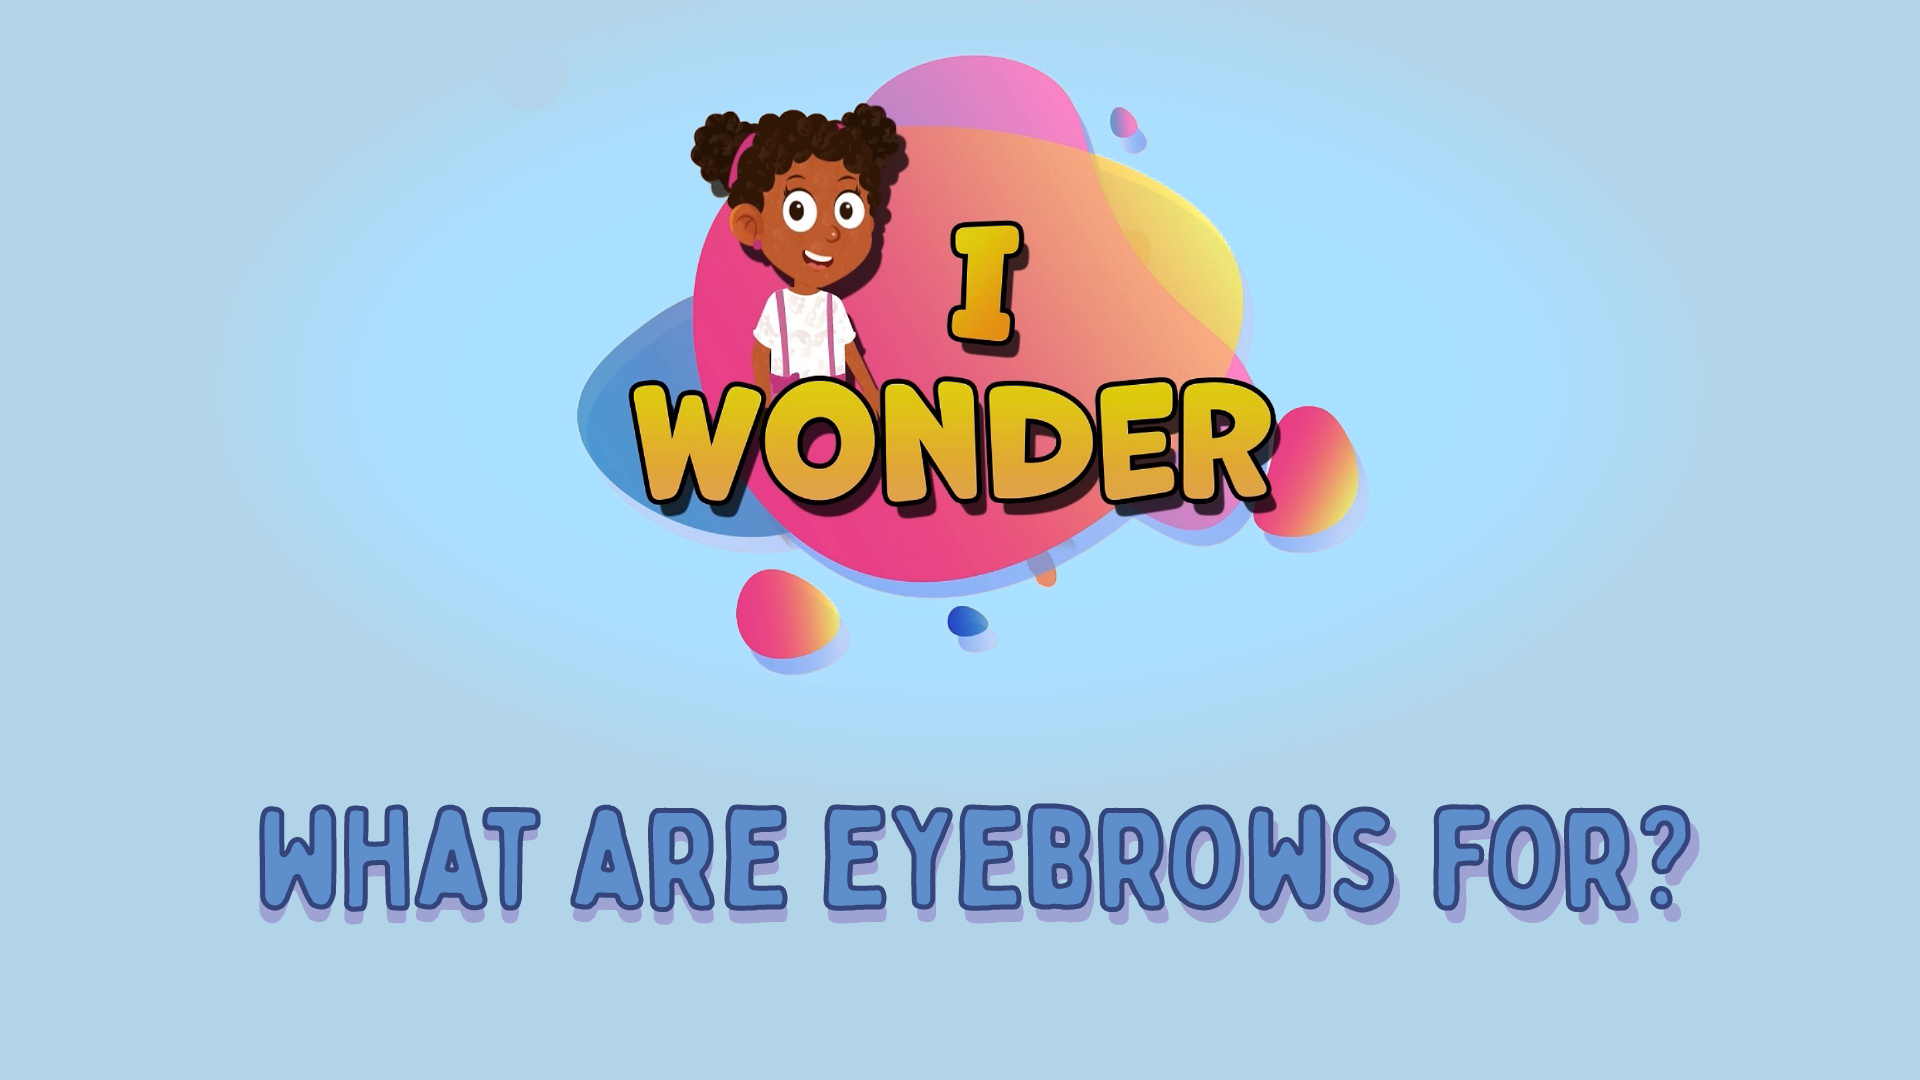 What Are Eyebrows For?